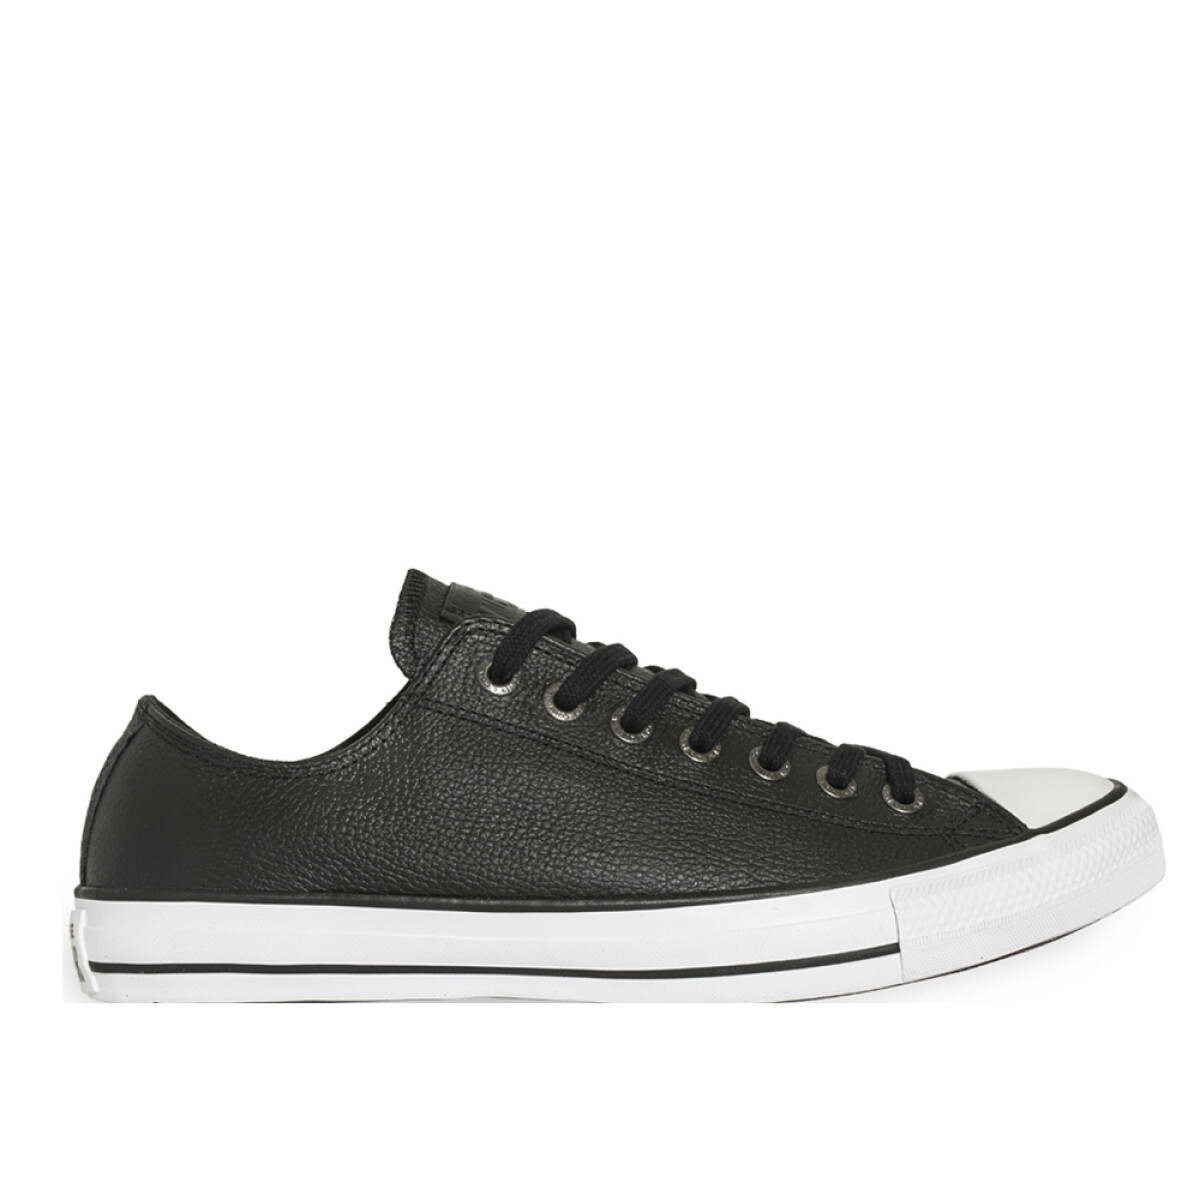 Championes Converse Chuck Taylor As Leather Hi Black Low 